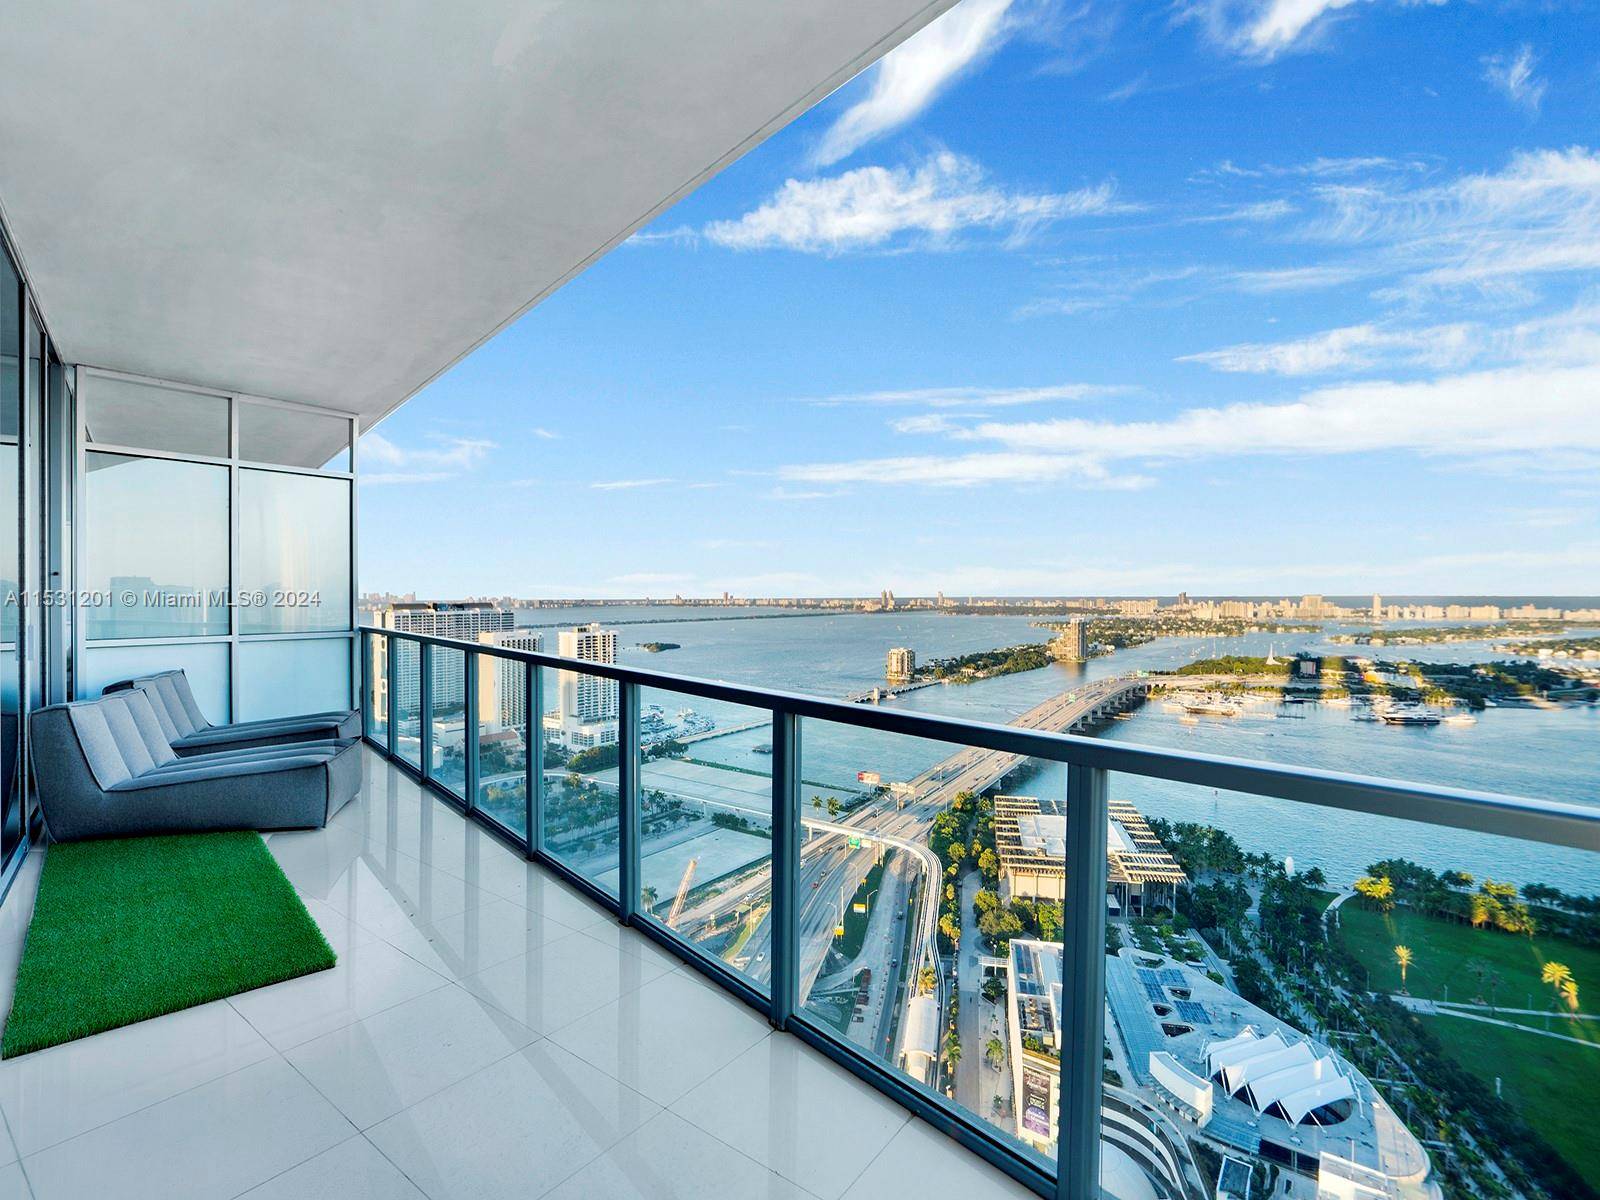 This 2106 sq ft 3BD 2. 5BA is one of the most sought after lines at Marquis Miami Residences.